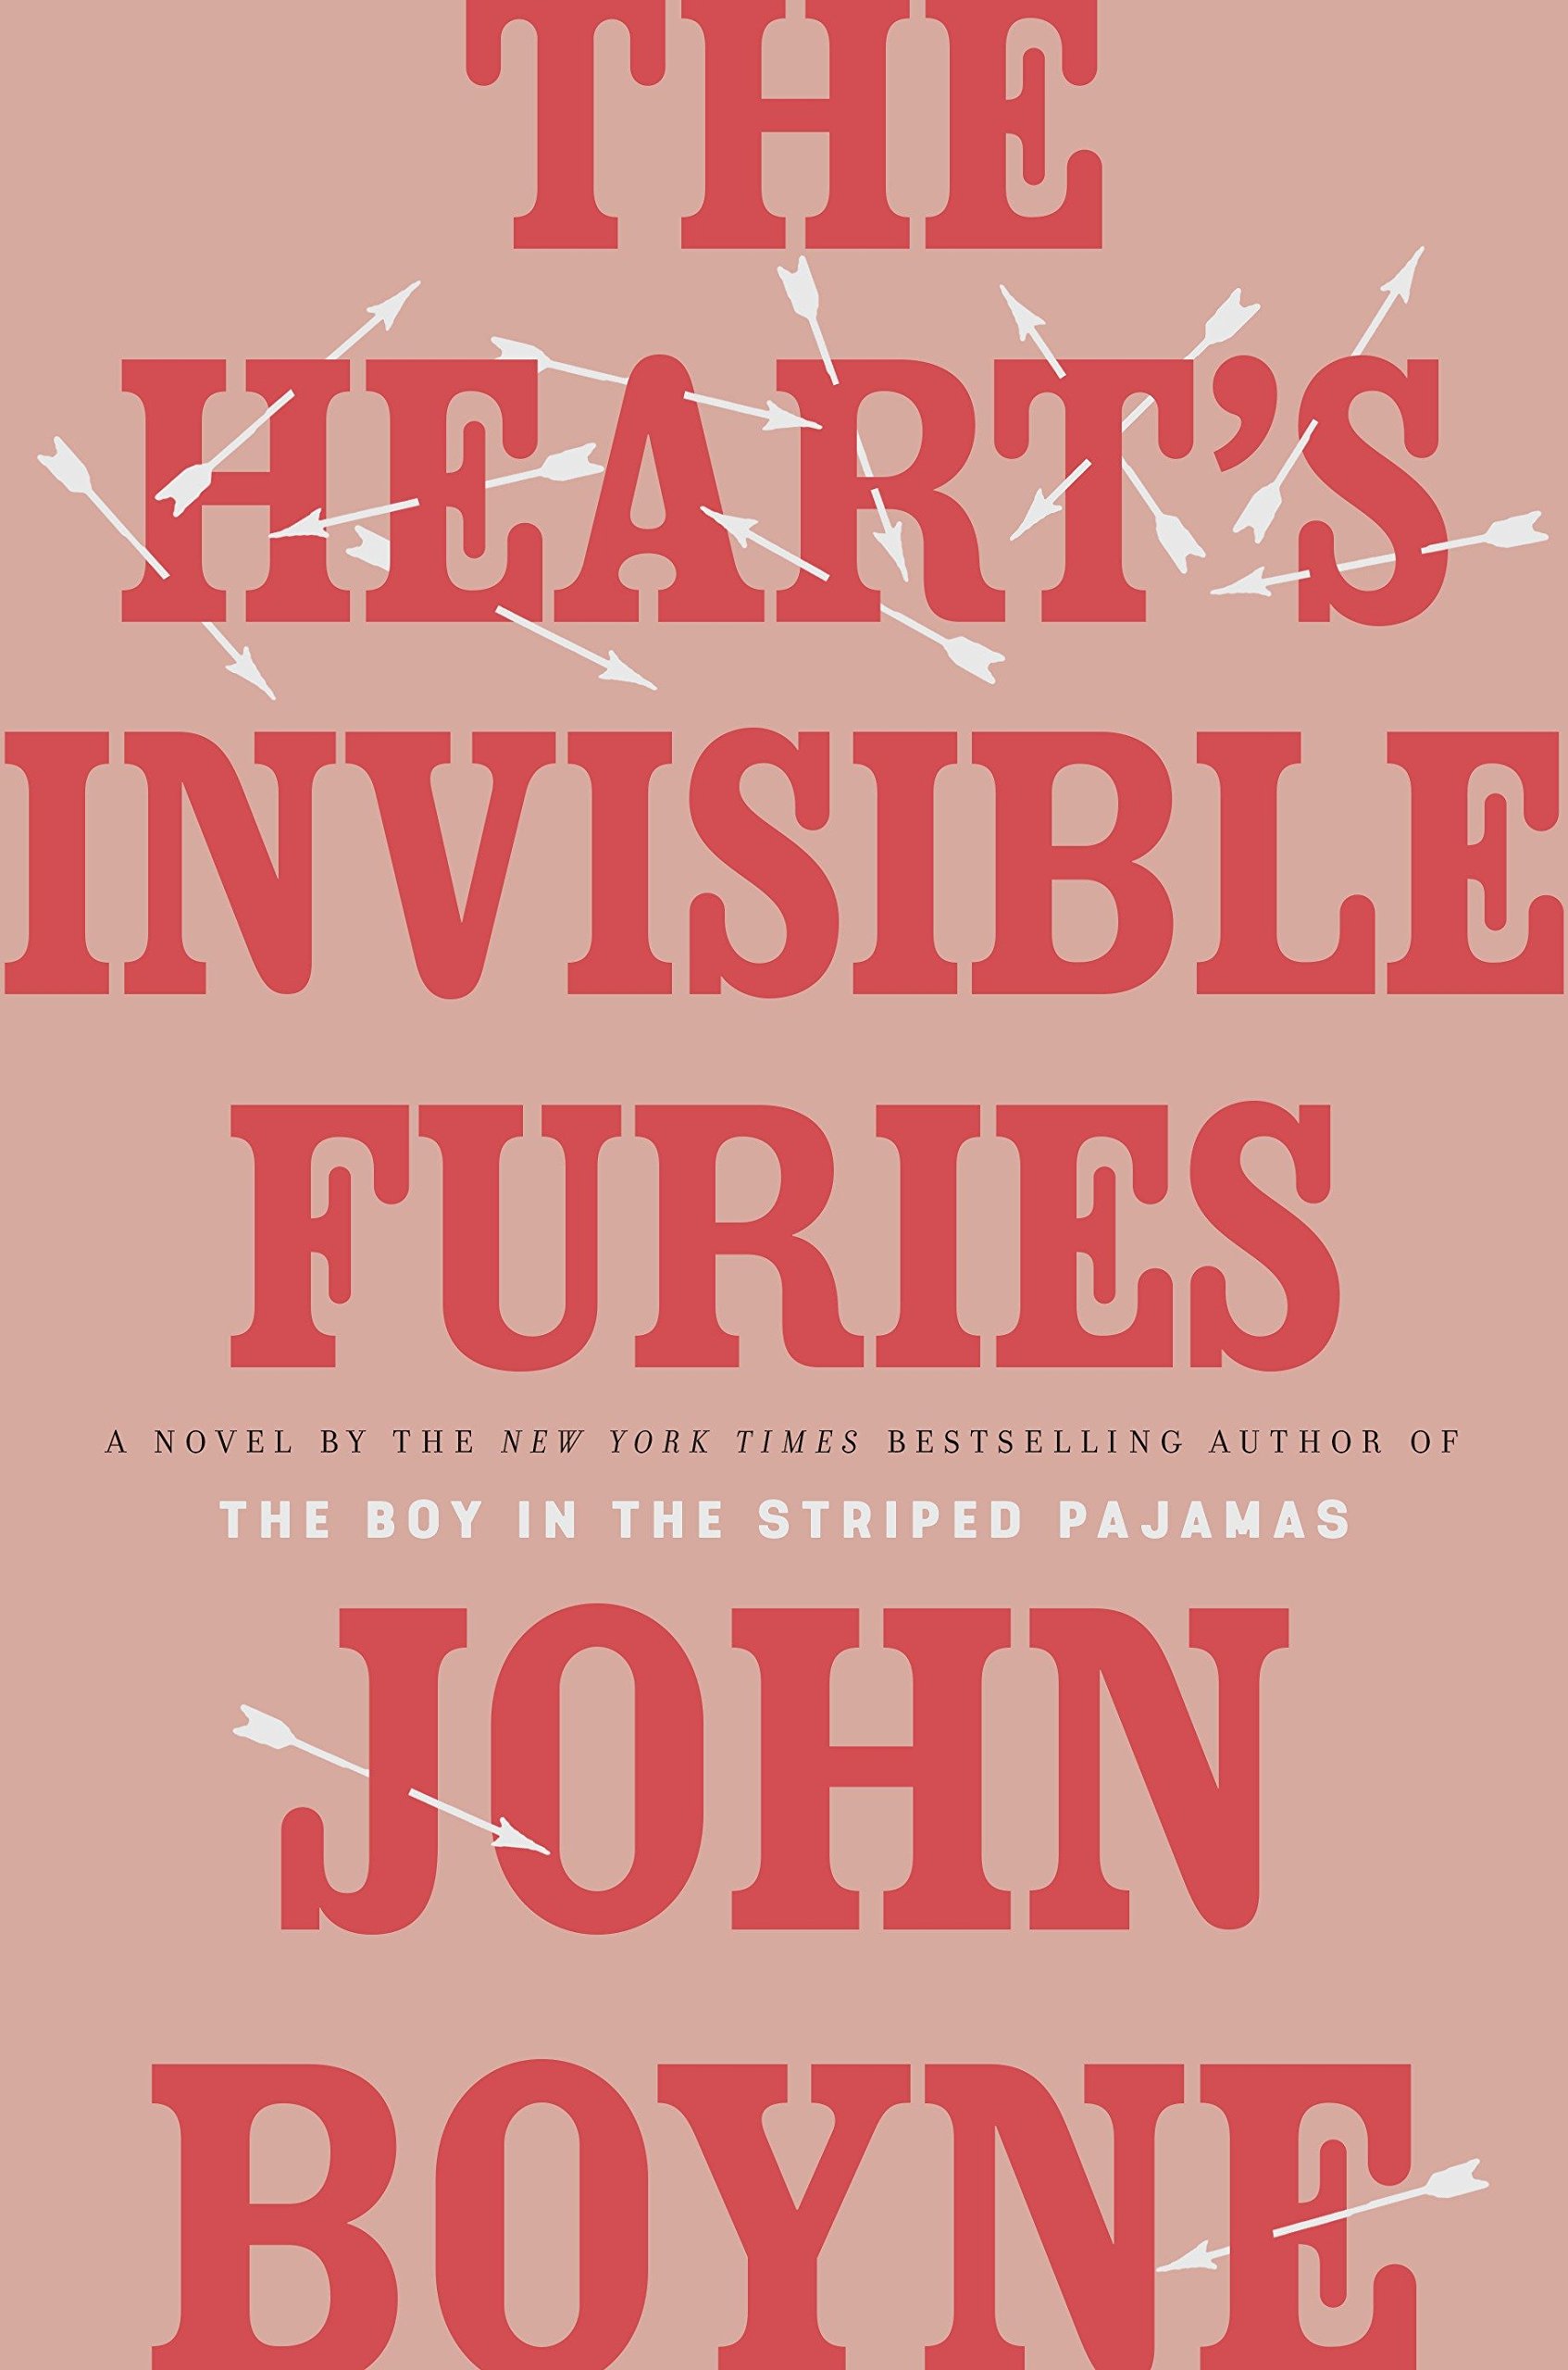 Image for "The Heart's Invisible Furies"